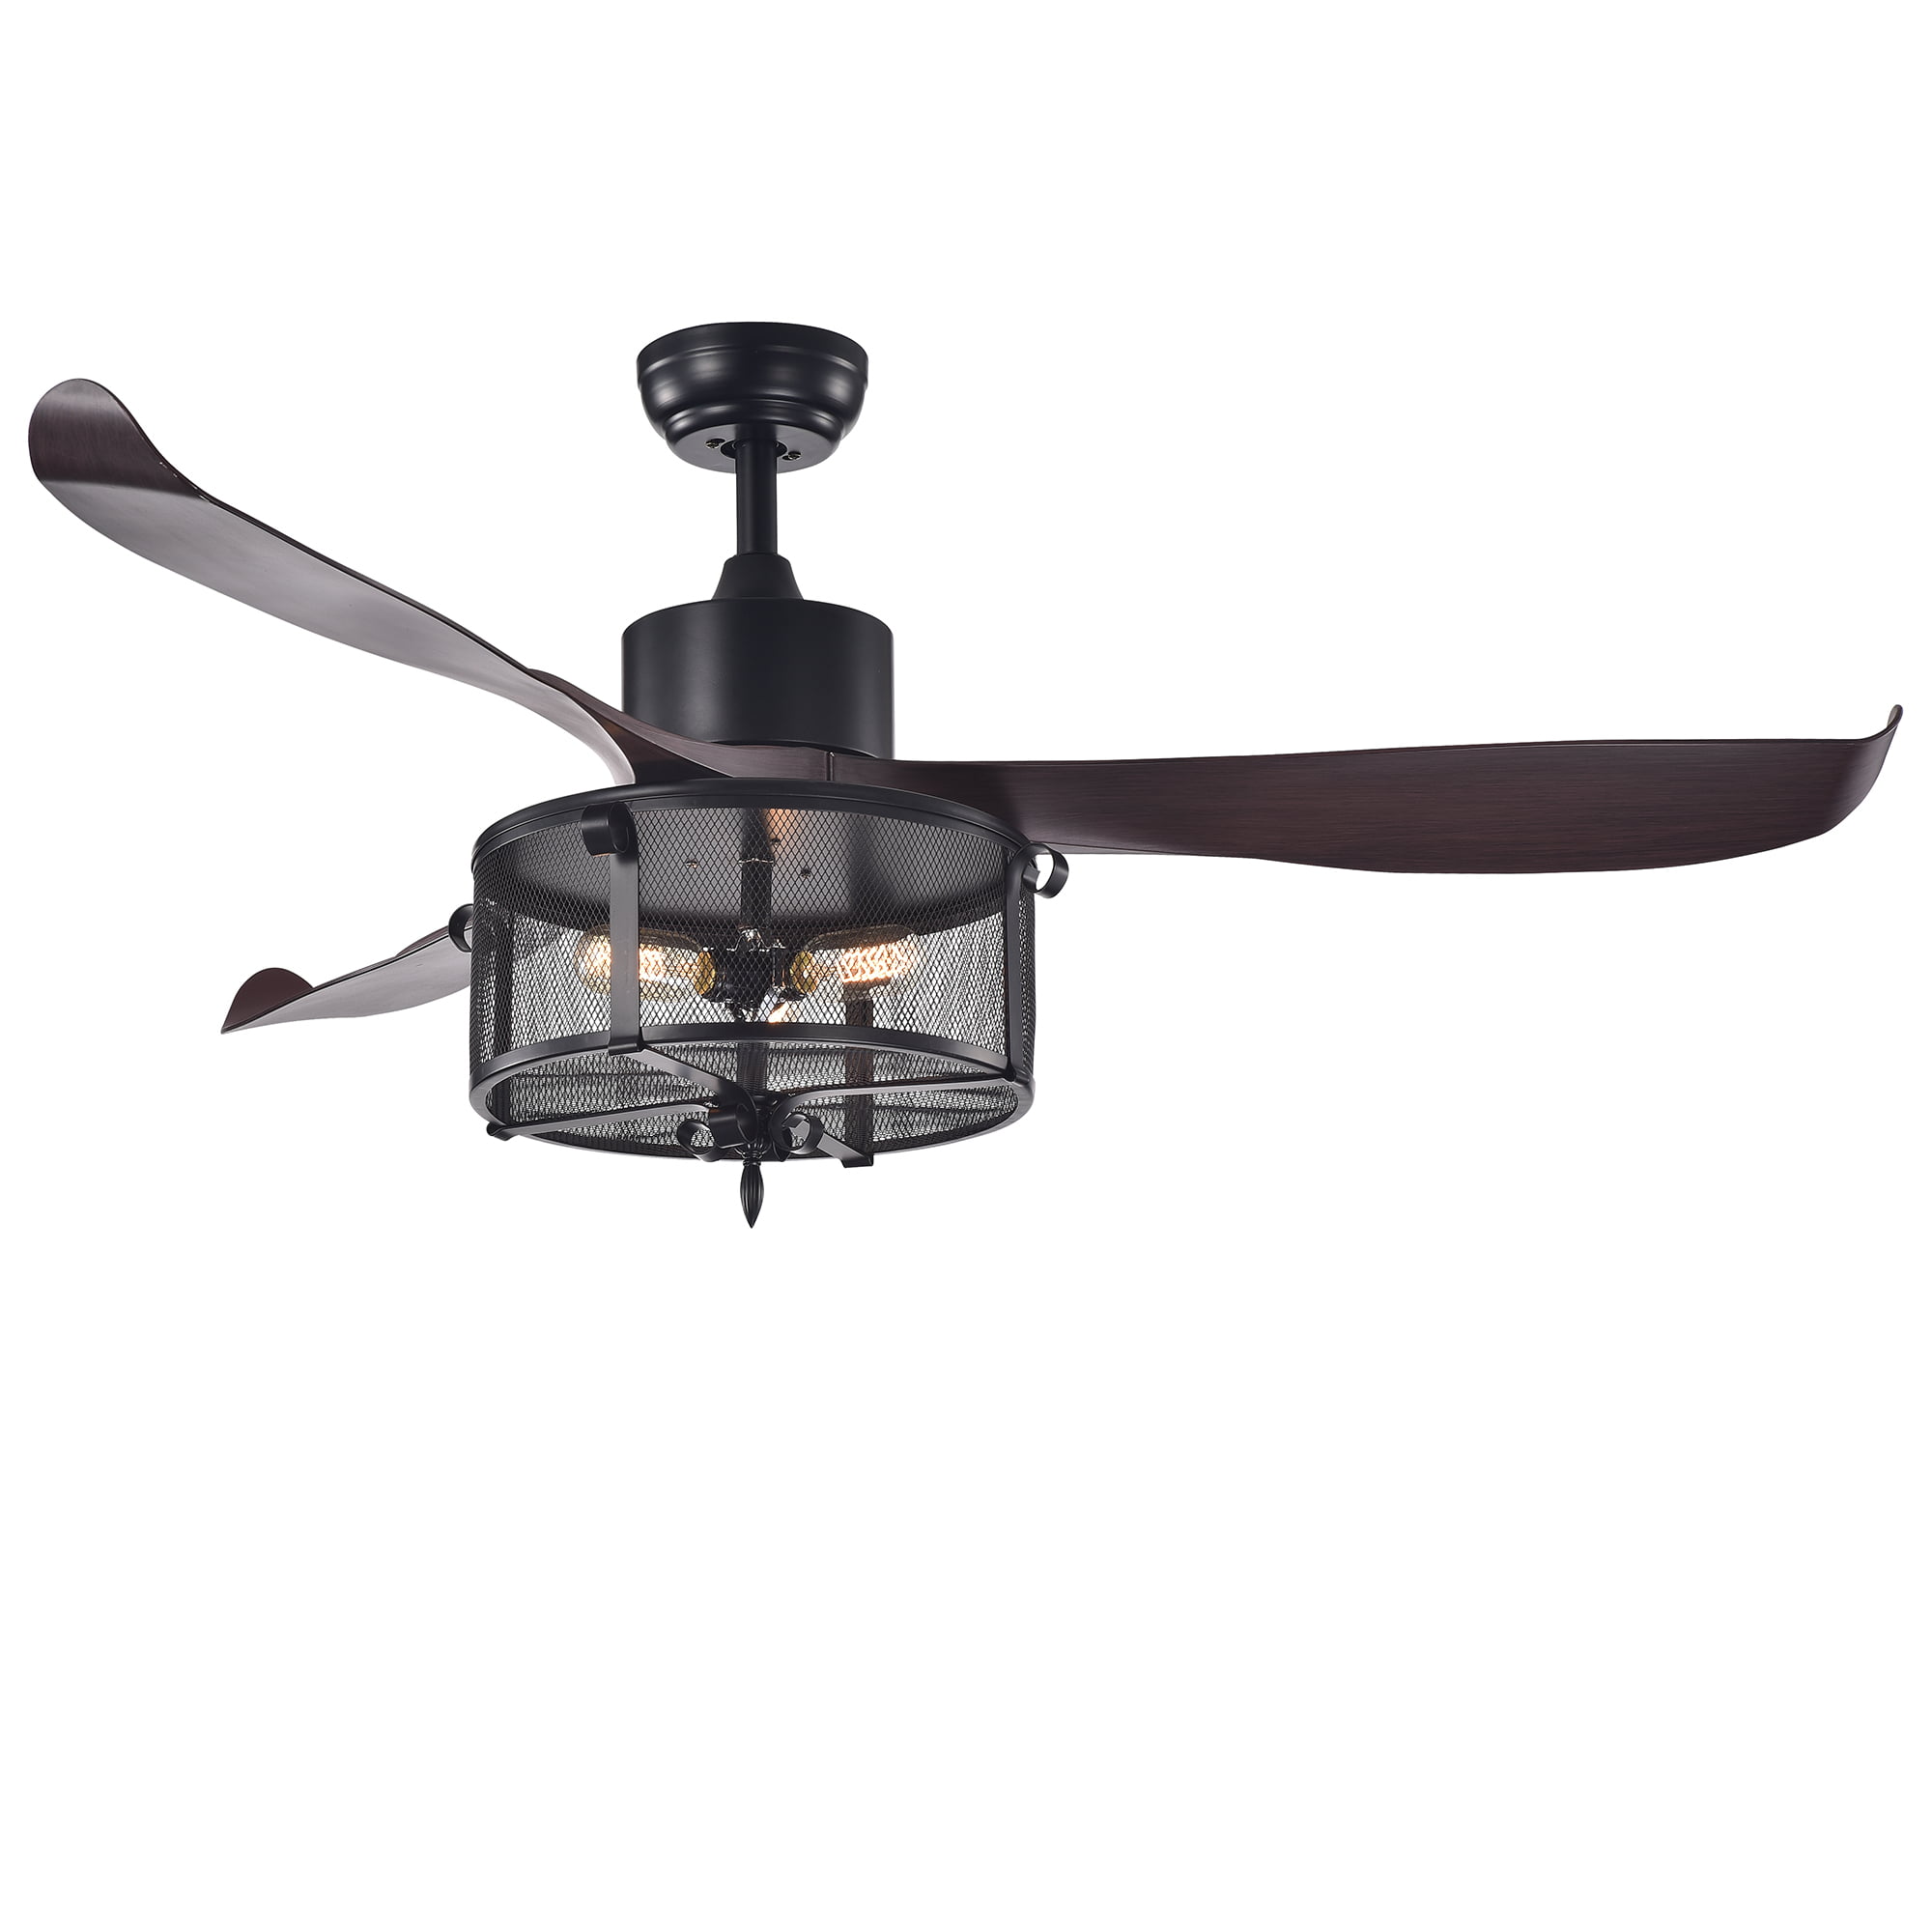 Faegan Matte Black 55-inch Lighted Ceiling Fan with Caged 3-Light Edison Lamp (includes remote and light kit)